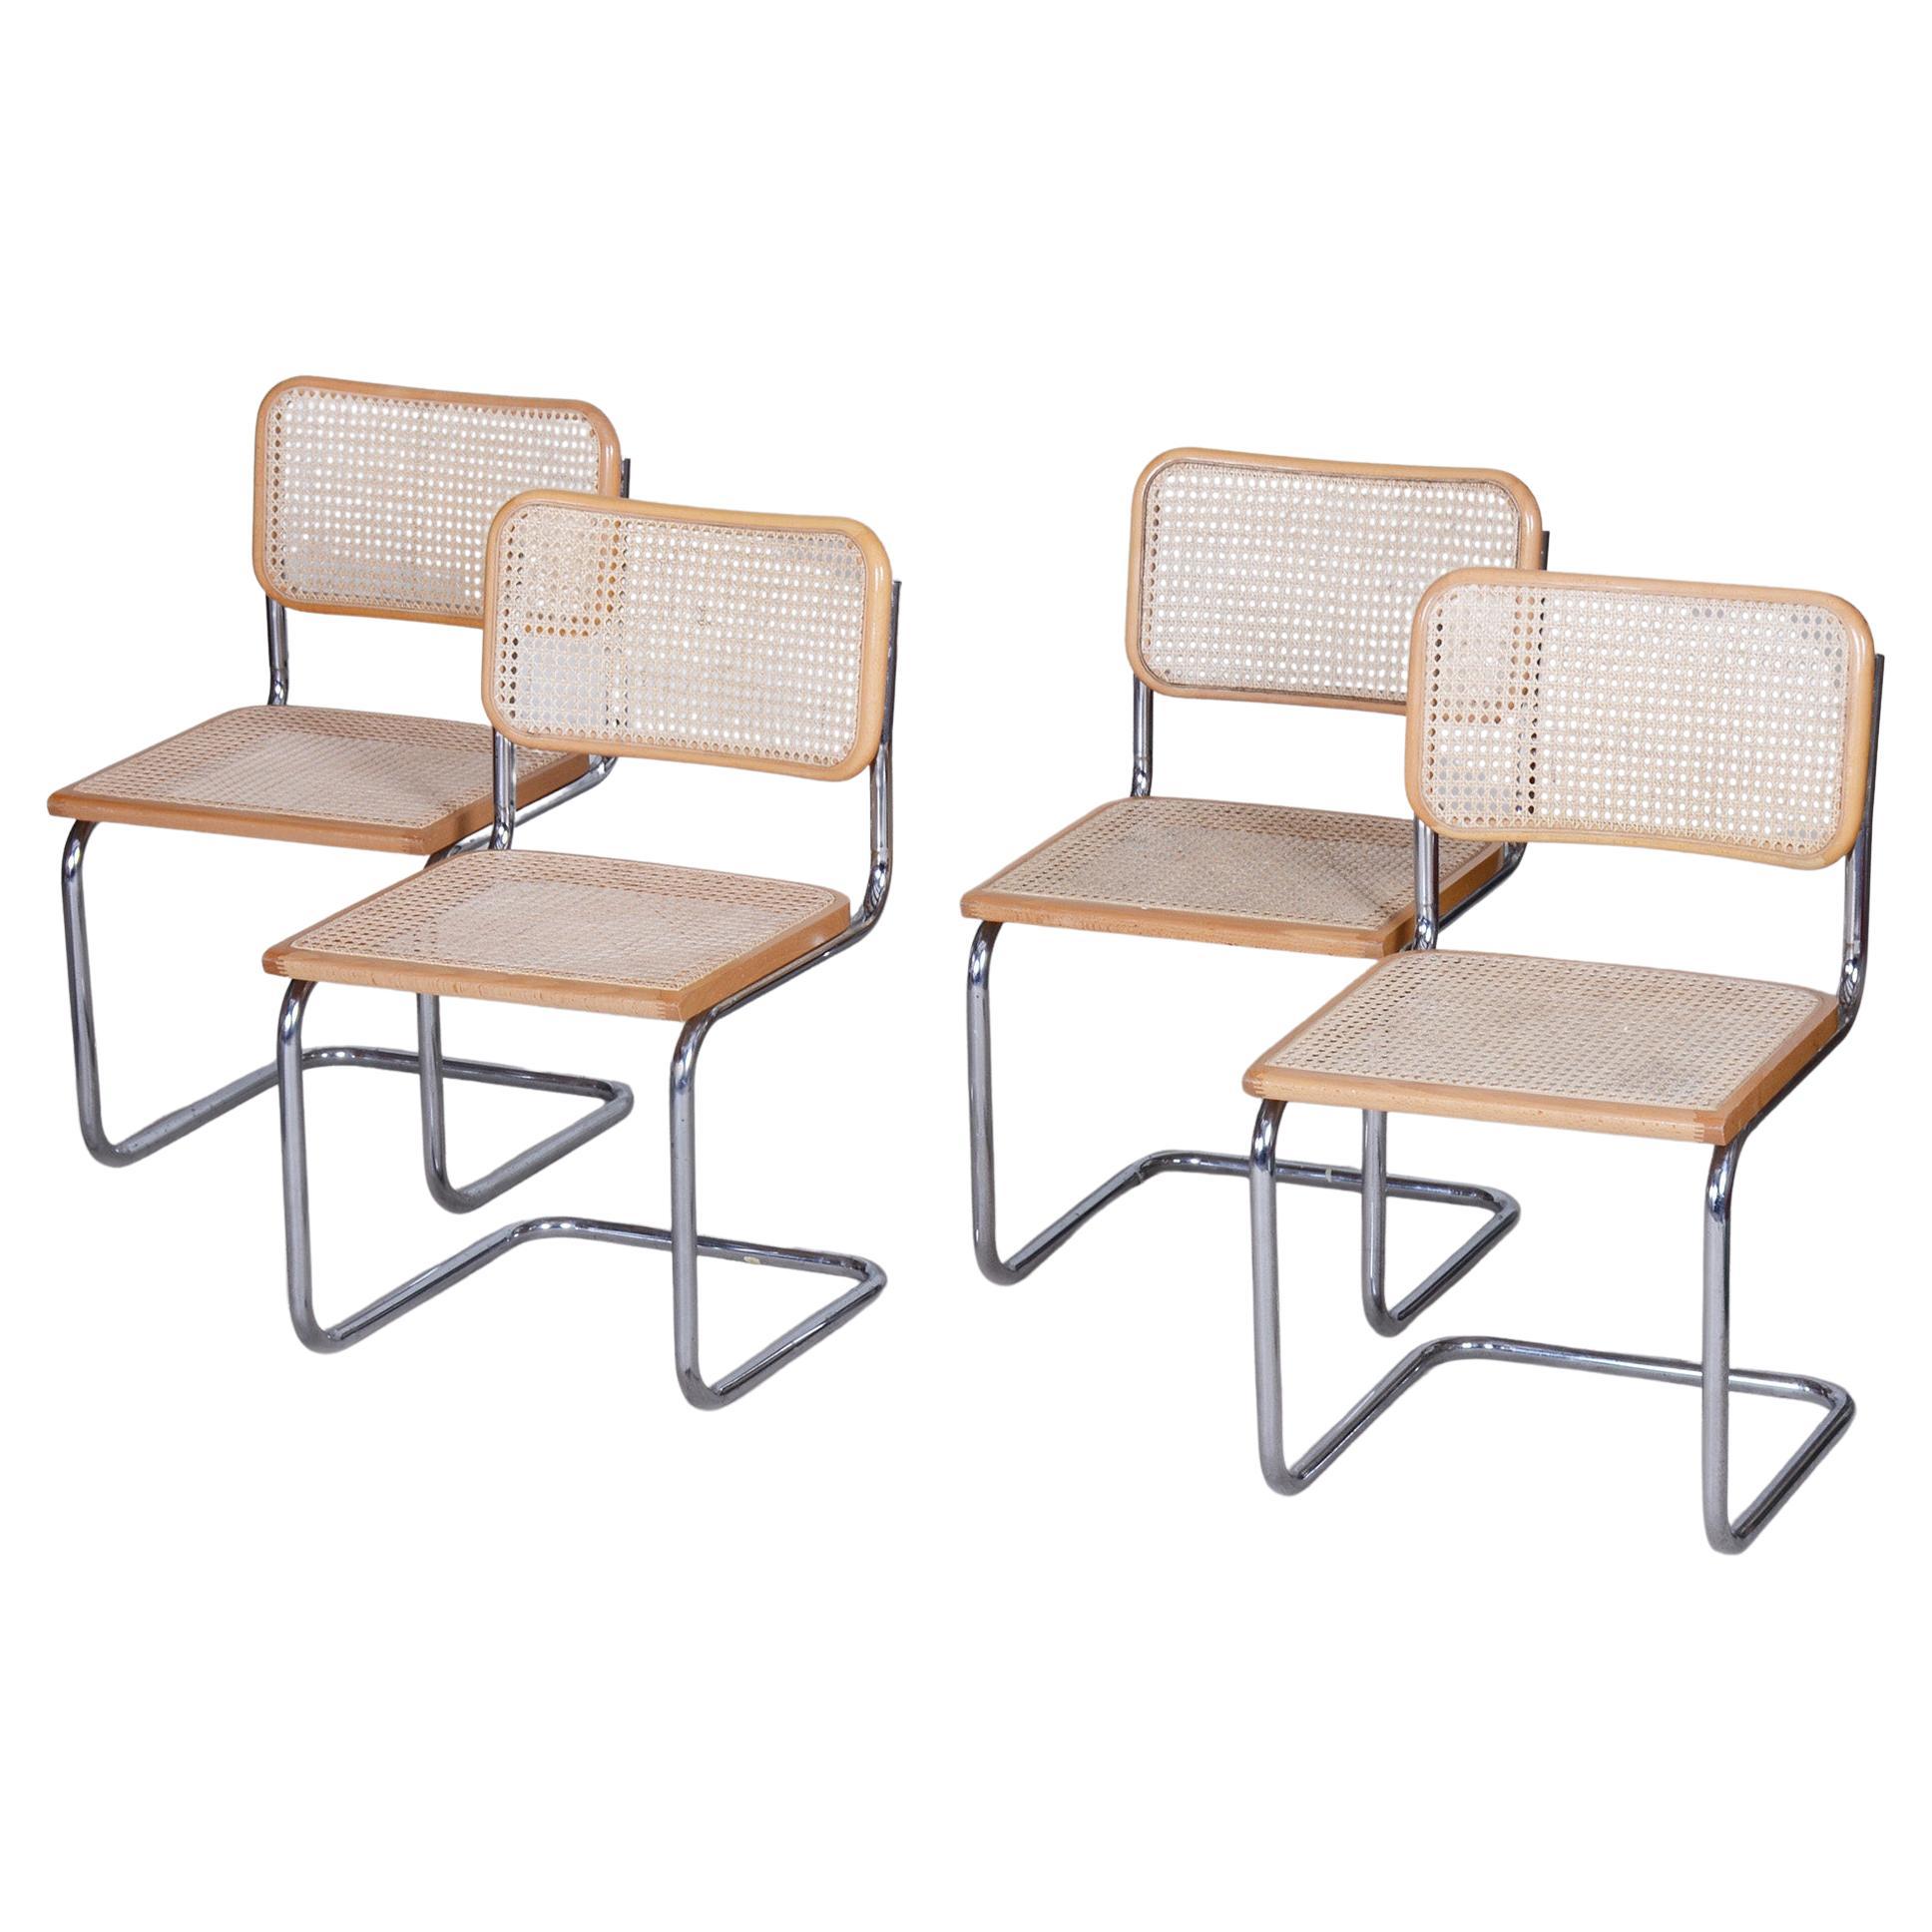 Set of Four Bauhaus Chairs, Chrome-Plated Steel, Rattan, Beech, Italy, 1960s For Sale